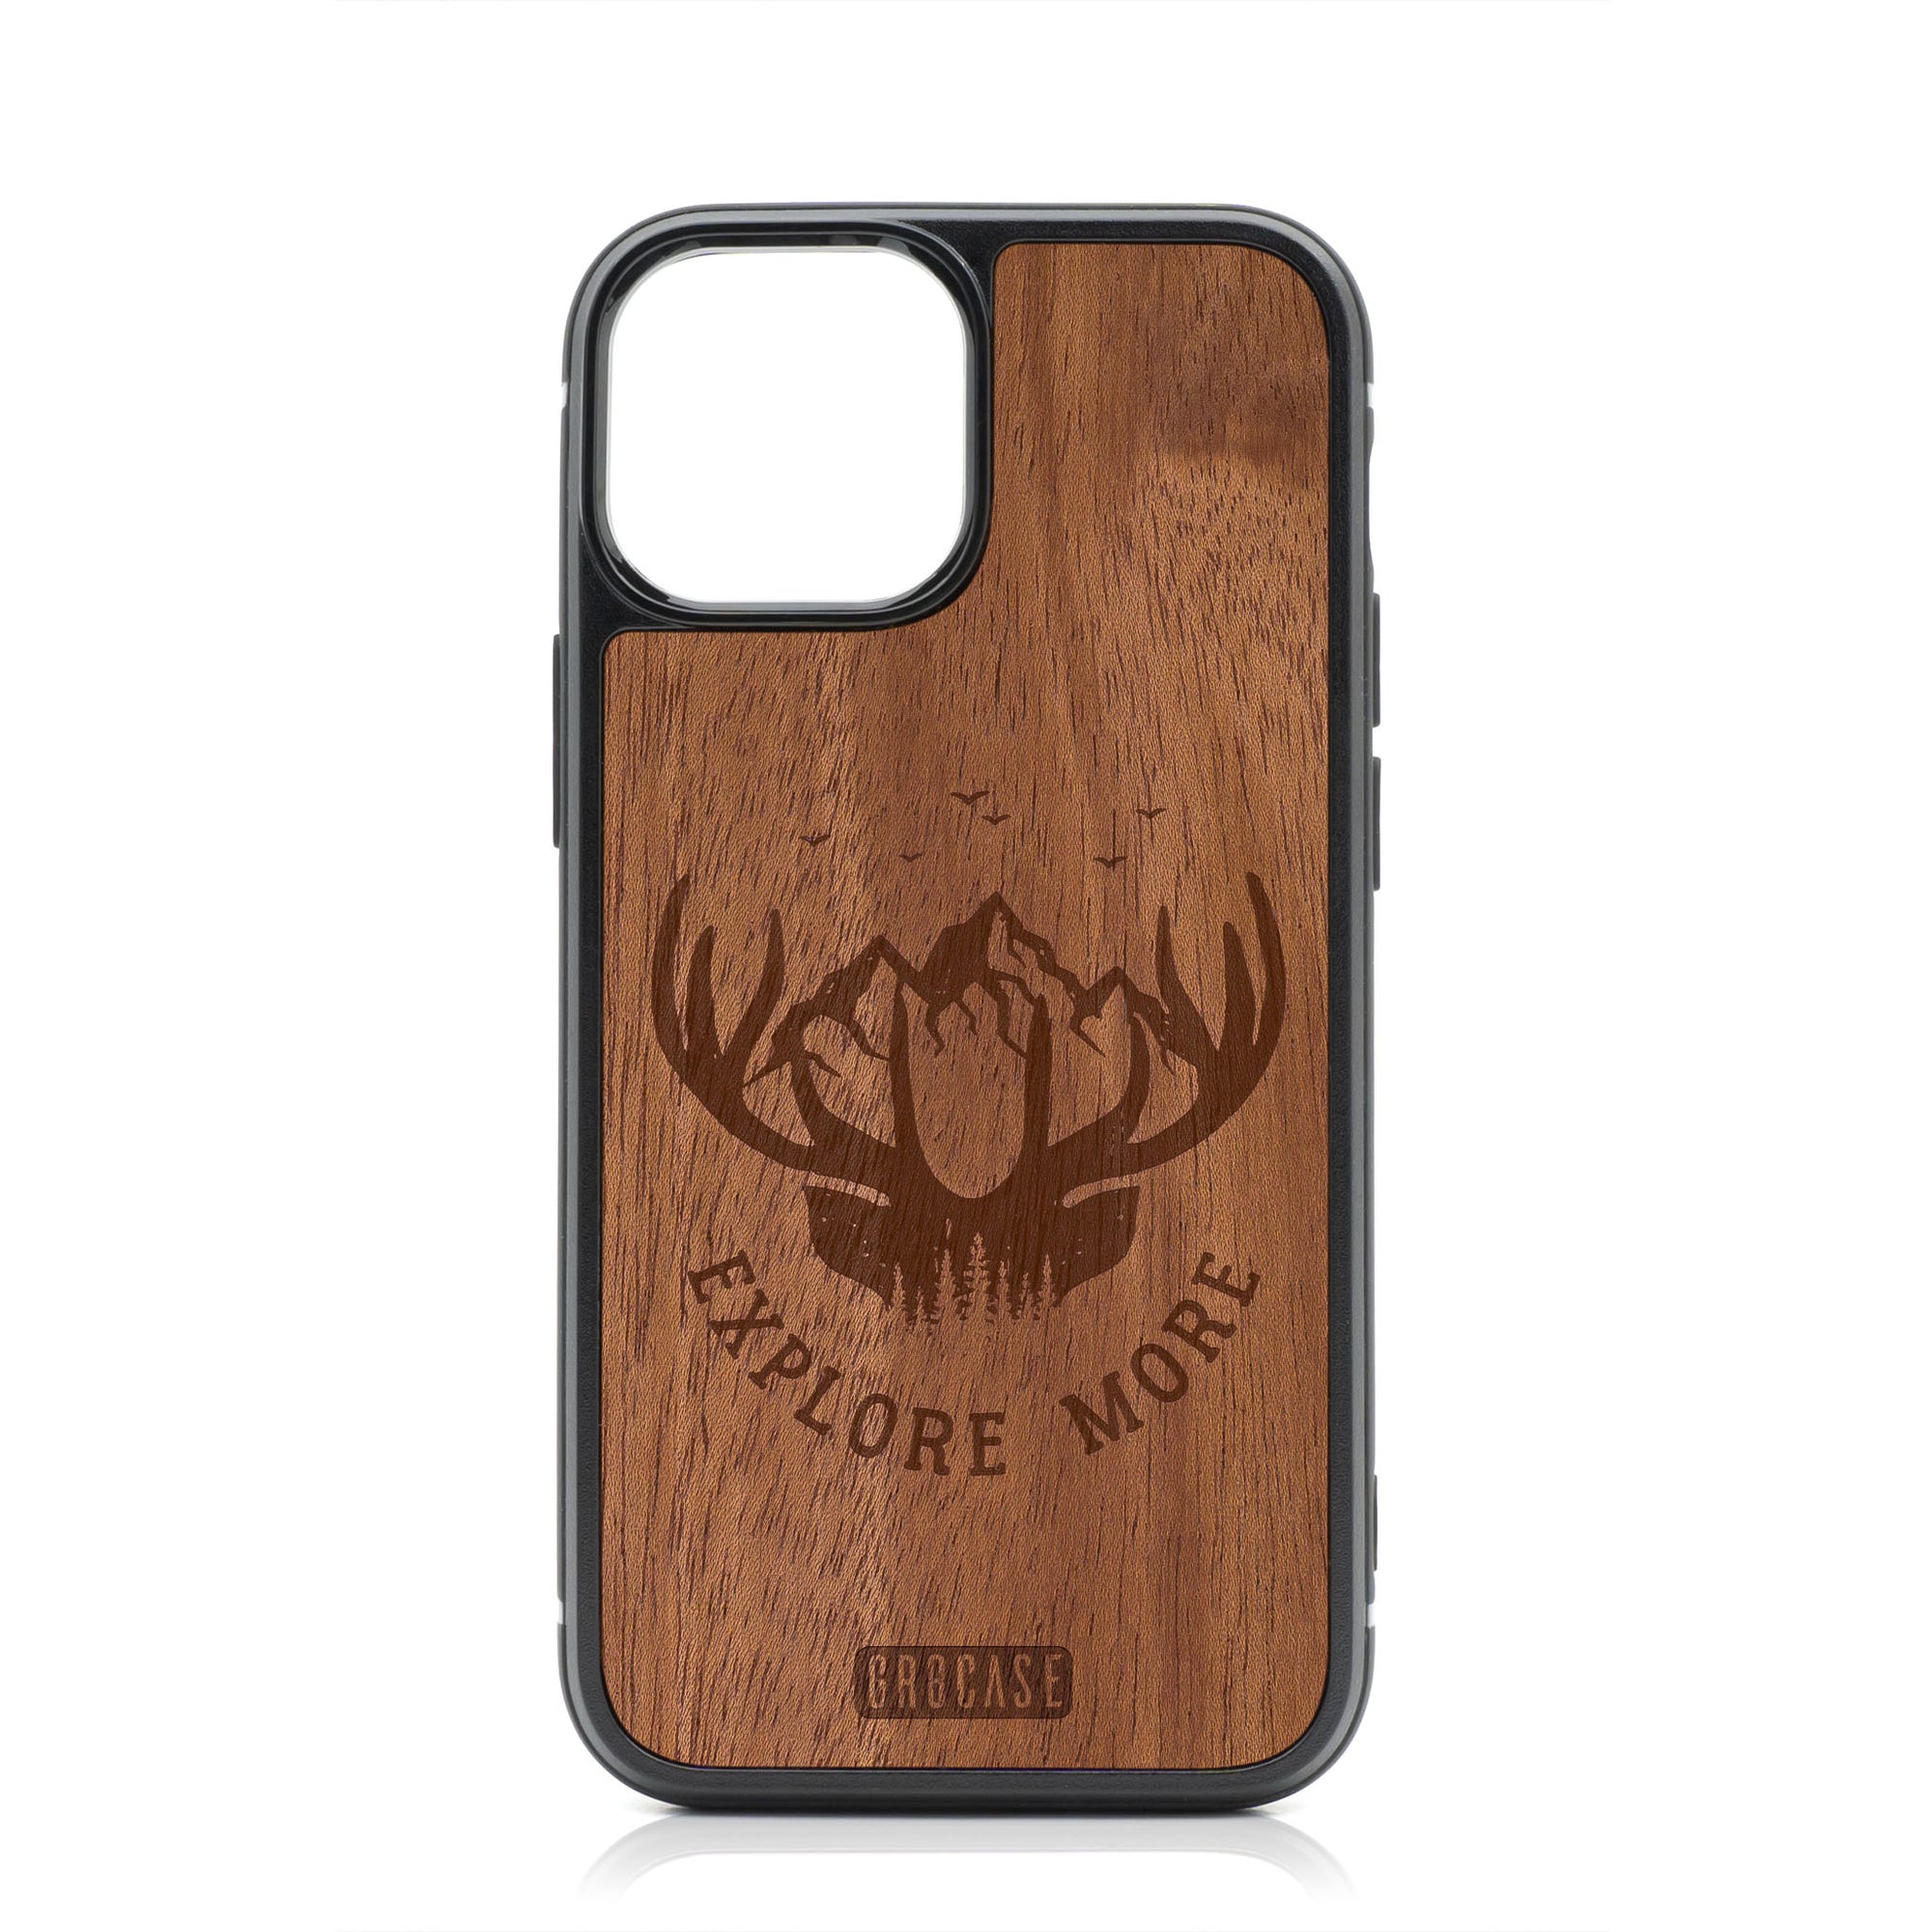 Explore More (Forest, Mountain & Antlers) Design Wood Case For iPhone 13 Mini